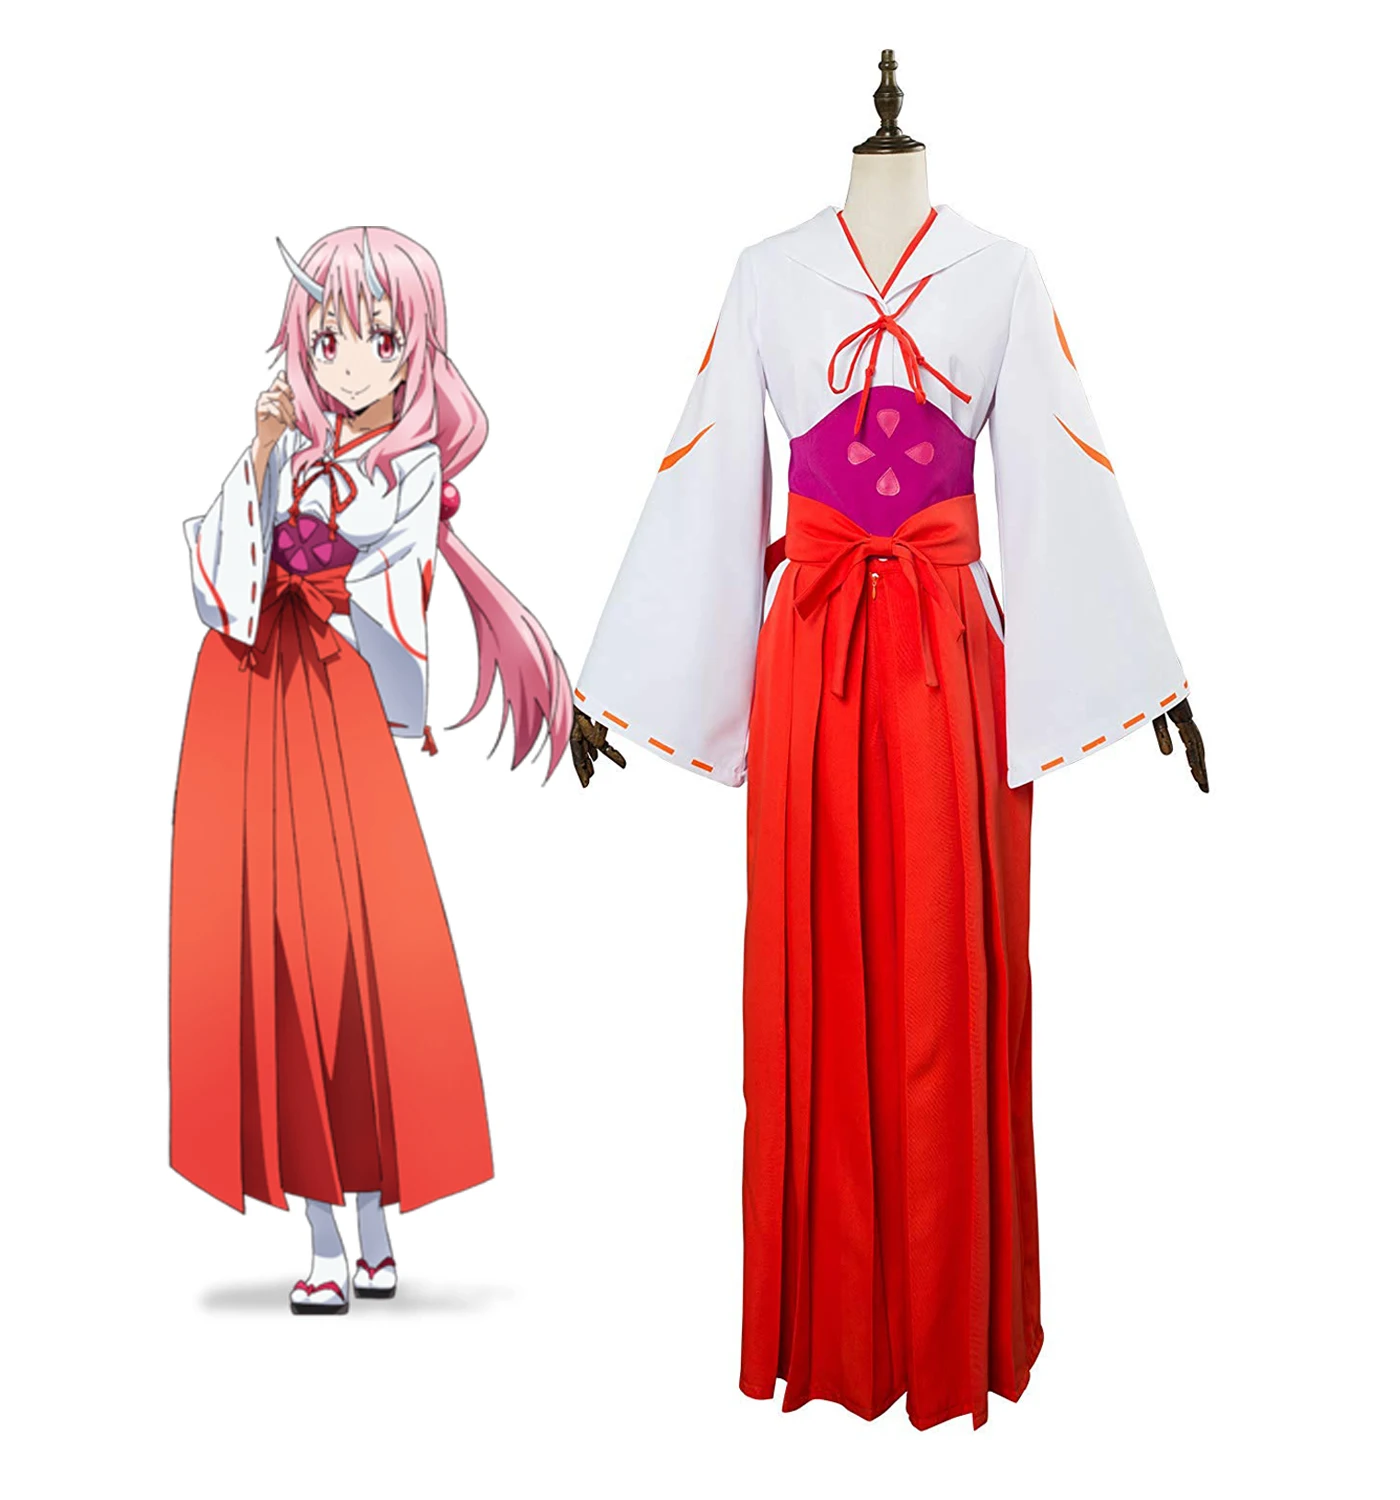 Details about   That Time I Got Reincarnated as a Slime shuna Cosplay Costume Dress Full Set&